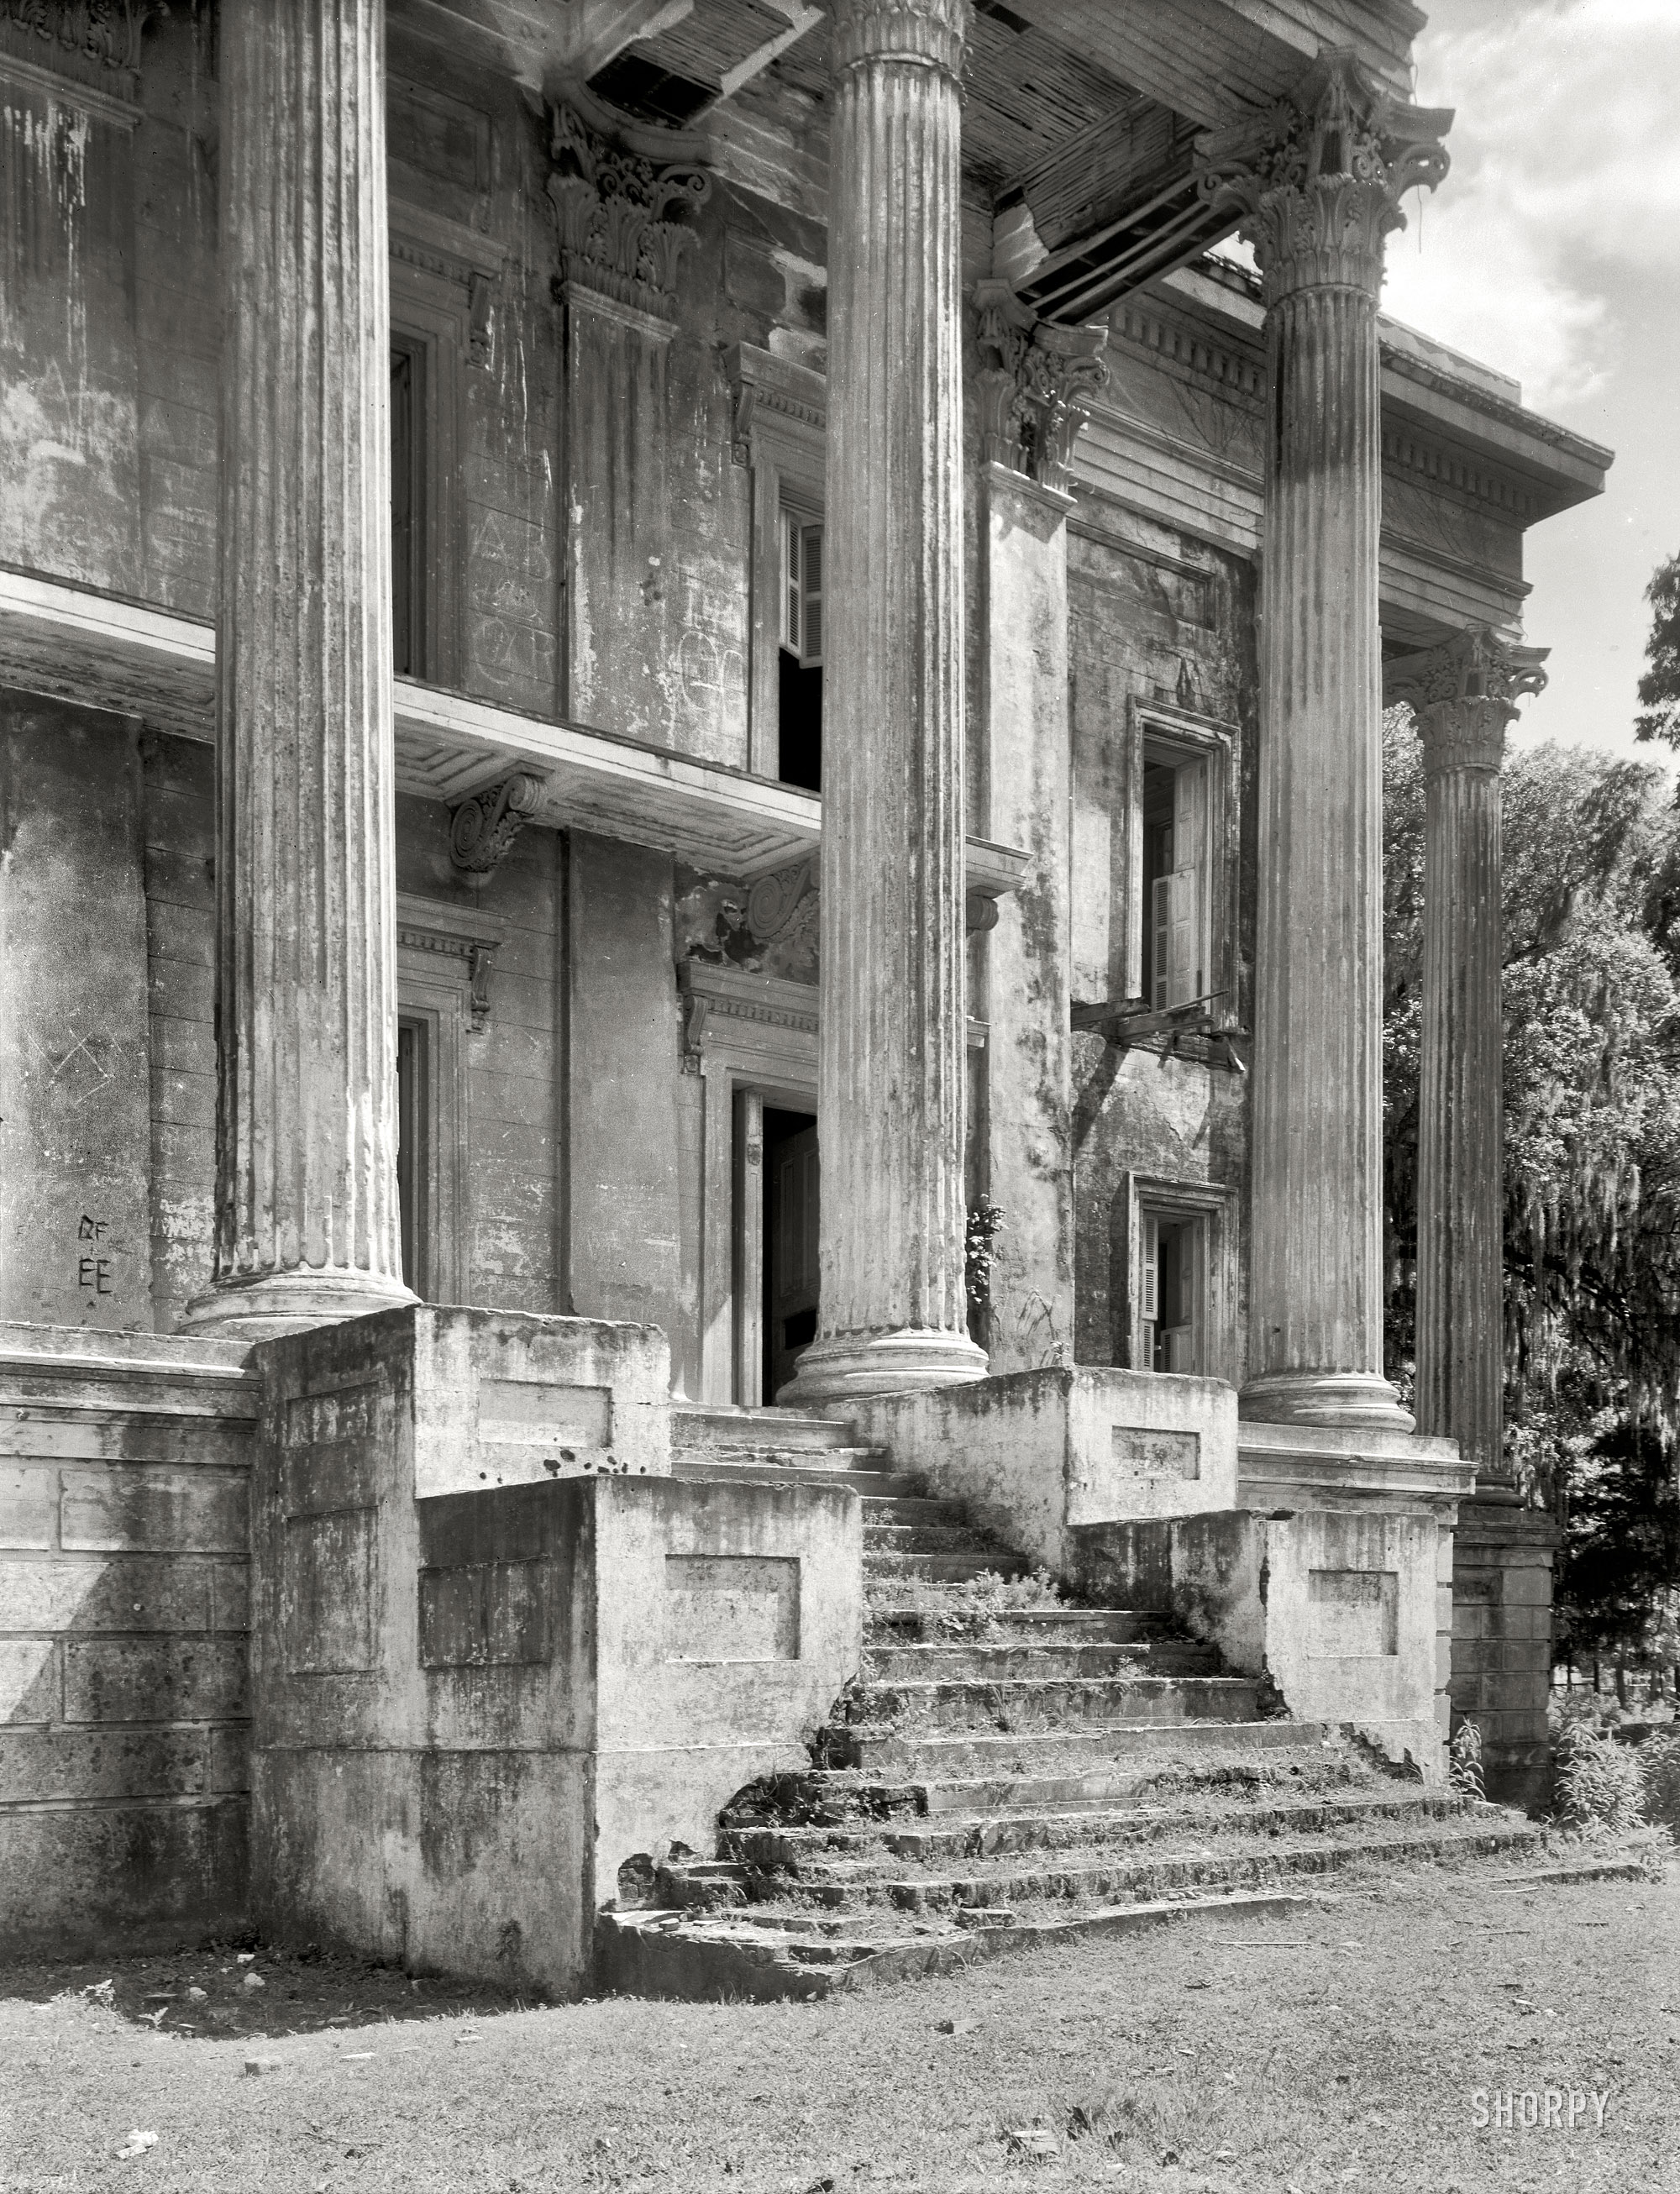 1938. Iberville Parish, Louisiana. "Belle Grove. Vicinity of White Castle. Greek Revival mansion of 75 rooms. Ruinous condition. Built 1857 by John Andrews, who sold it to Stone Ware. Occupied by Ware family until circa 1913." The decaying portico of what was reputedly the largest plantation home in the South. 8x10 inch safety negative by Frances Benjamin Johnston. View full size.